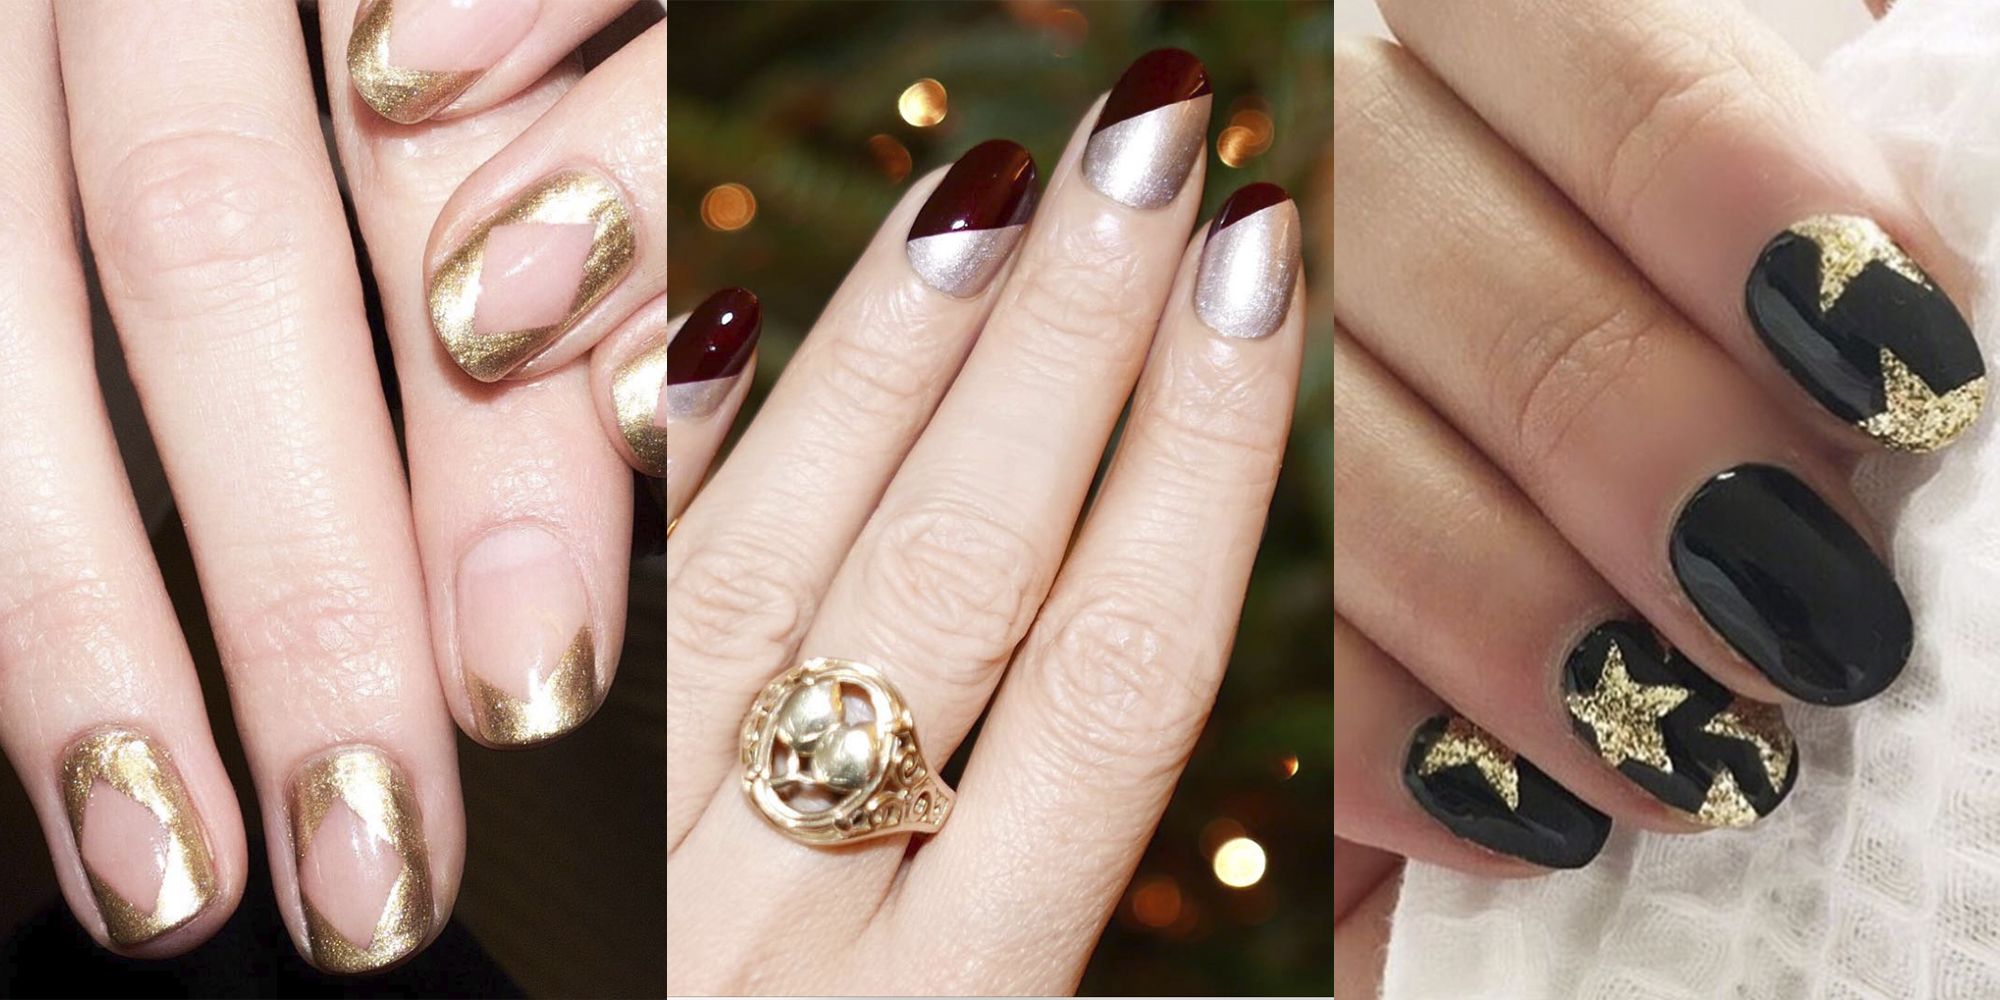 50 Black Nail Designs That Are Classy and Chic